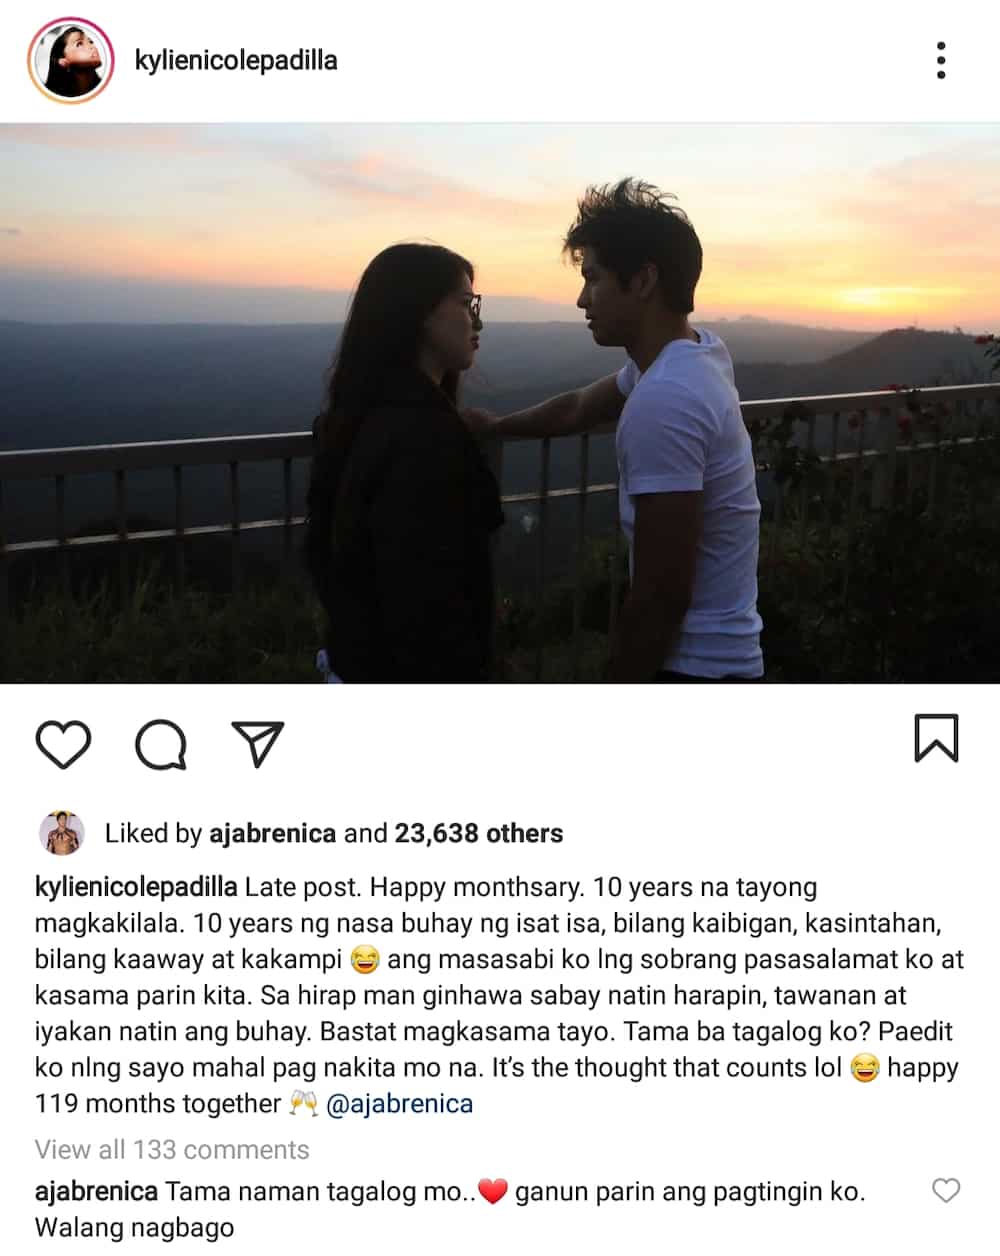 Kylie Padilla, Aljur Abrenica exchange sweet messages on their "monthsary"